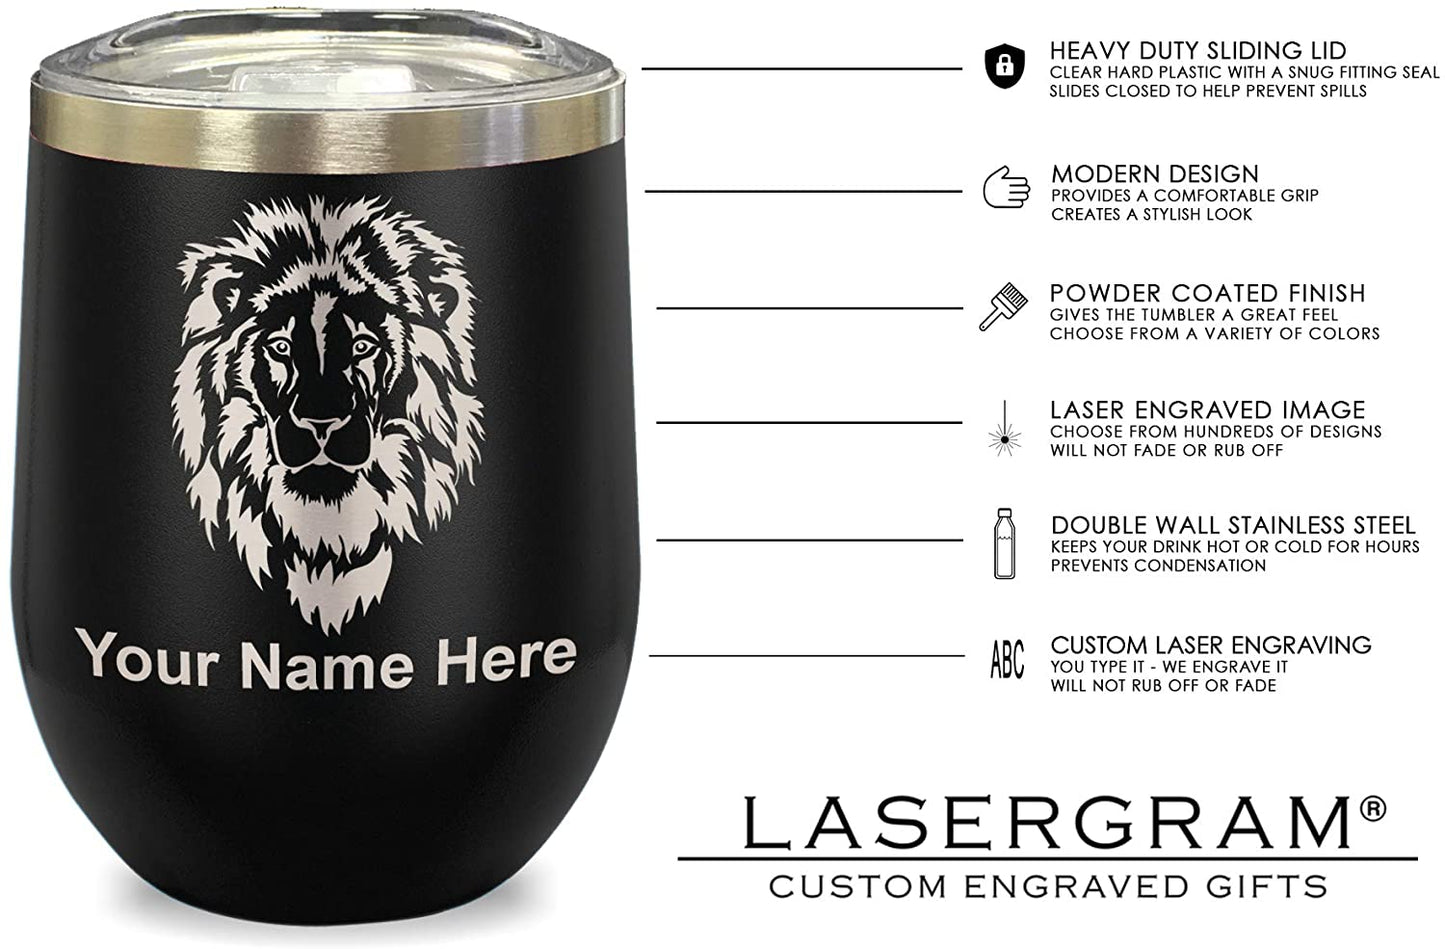 LaserGram Double Wall Stainless Steel Wine Glass, World's Greatest Granddaughter, Personalized Engraving Included